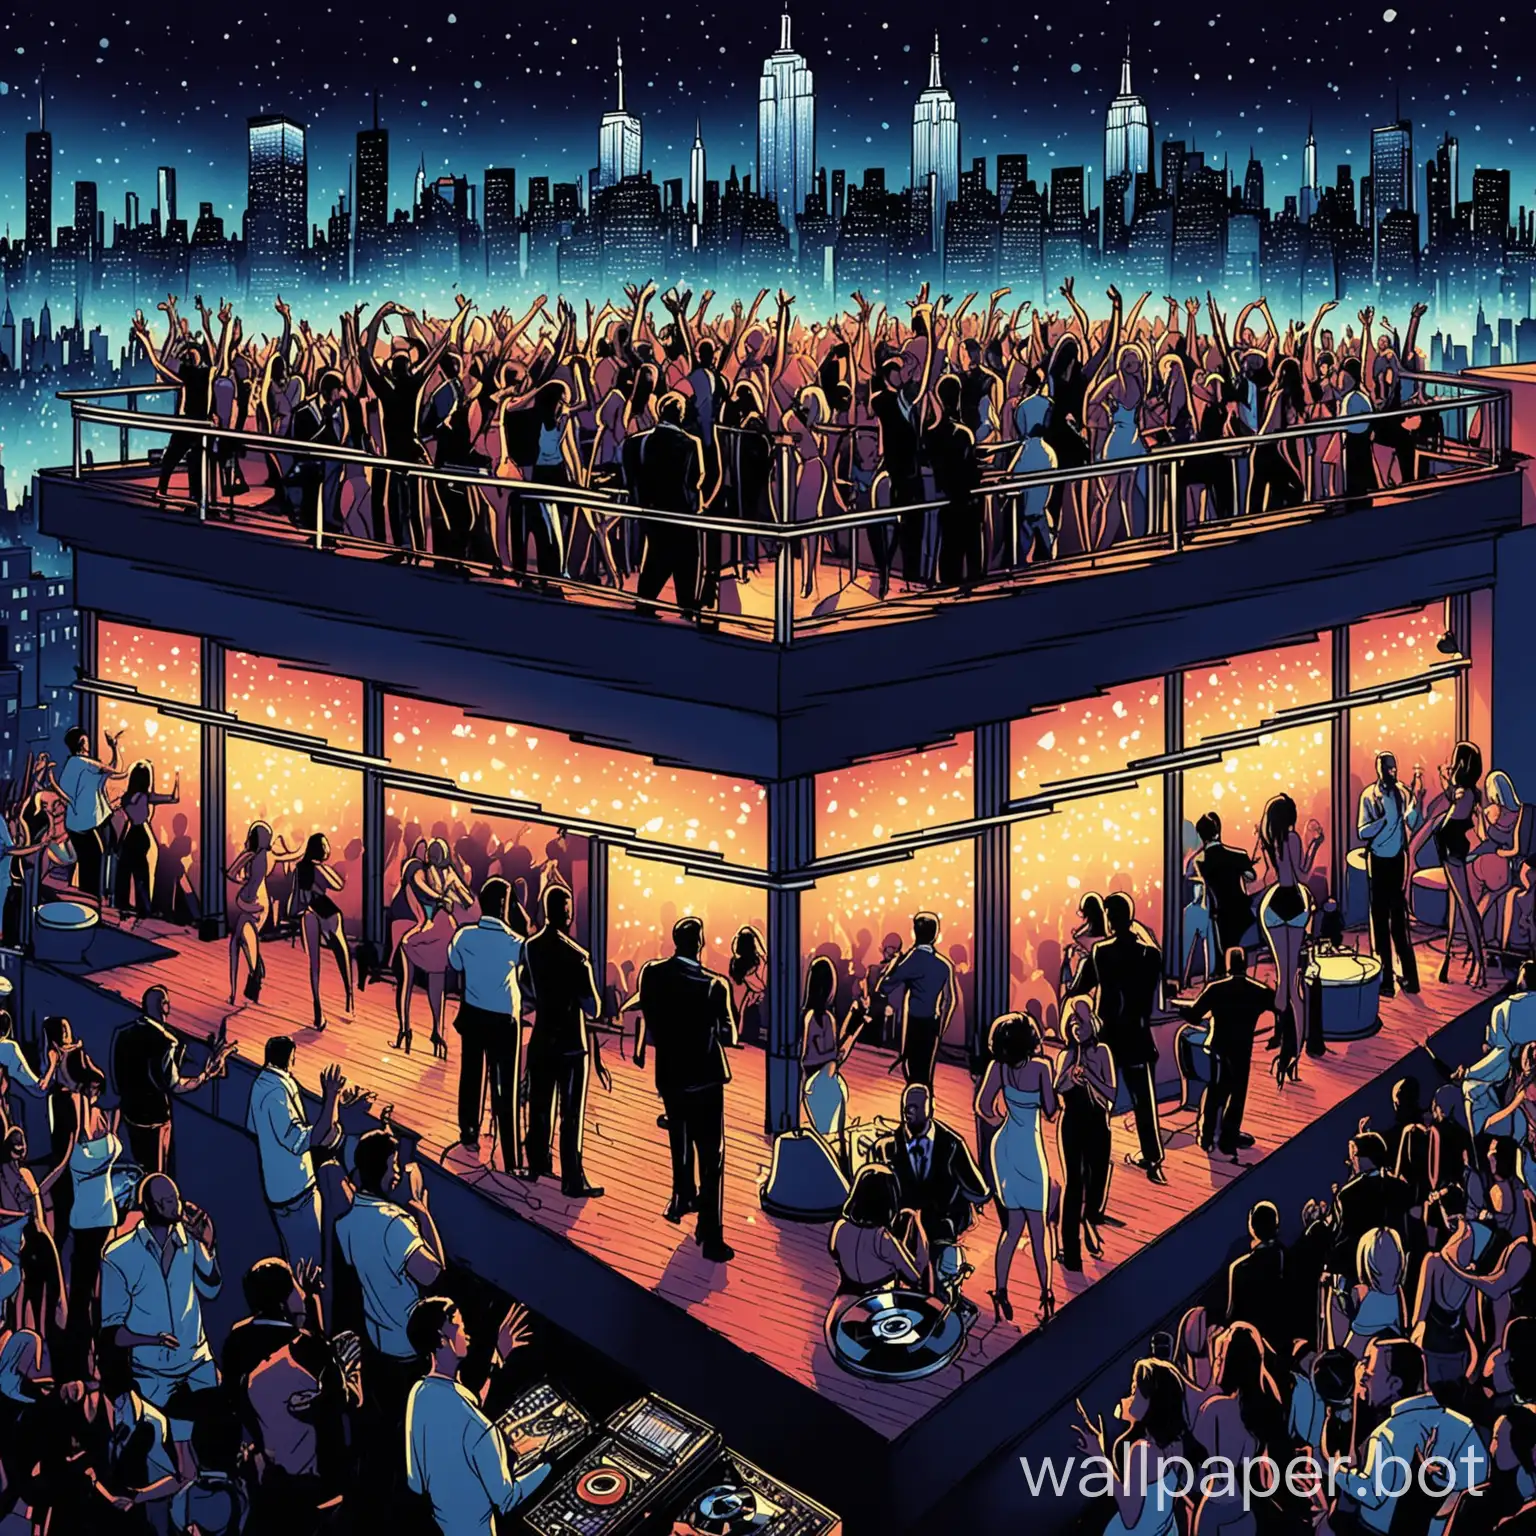 Vibrant-New-York-City-Rooftop-Nightclub-Scene-with-House-Music-and-Bustling-Crowd-Illustration